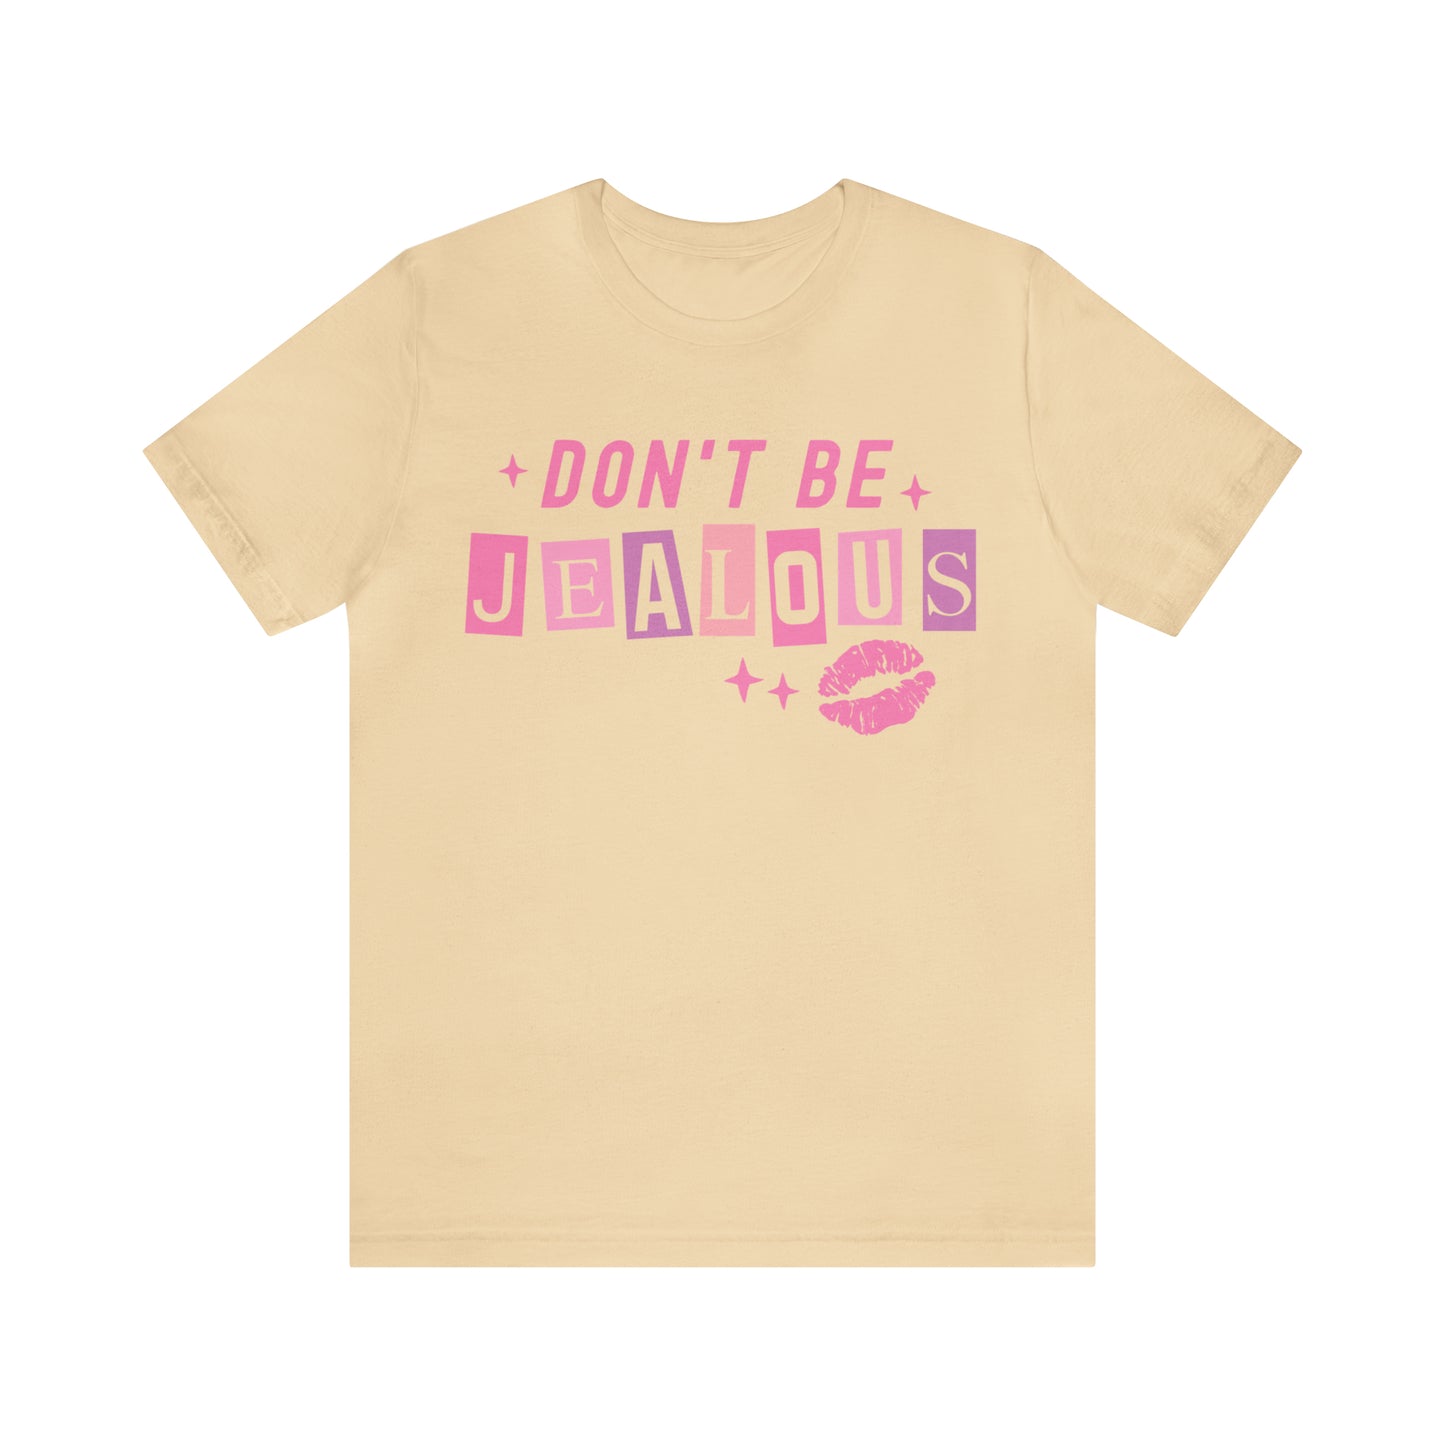 Don't Be Jealous, Funny Sarcastic Shirt for Girls